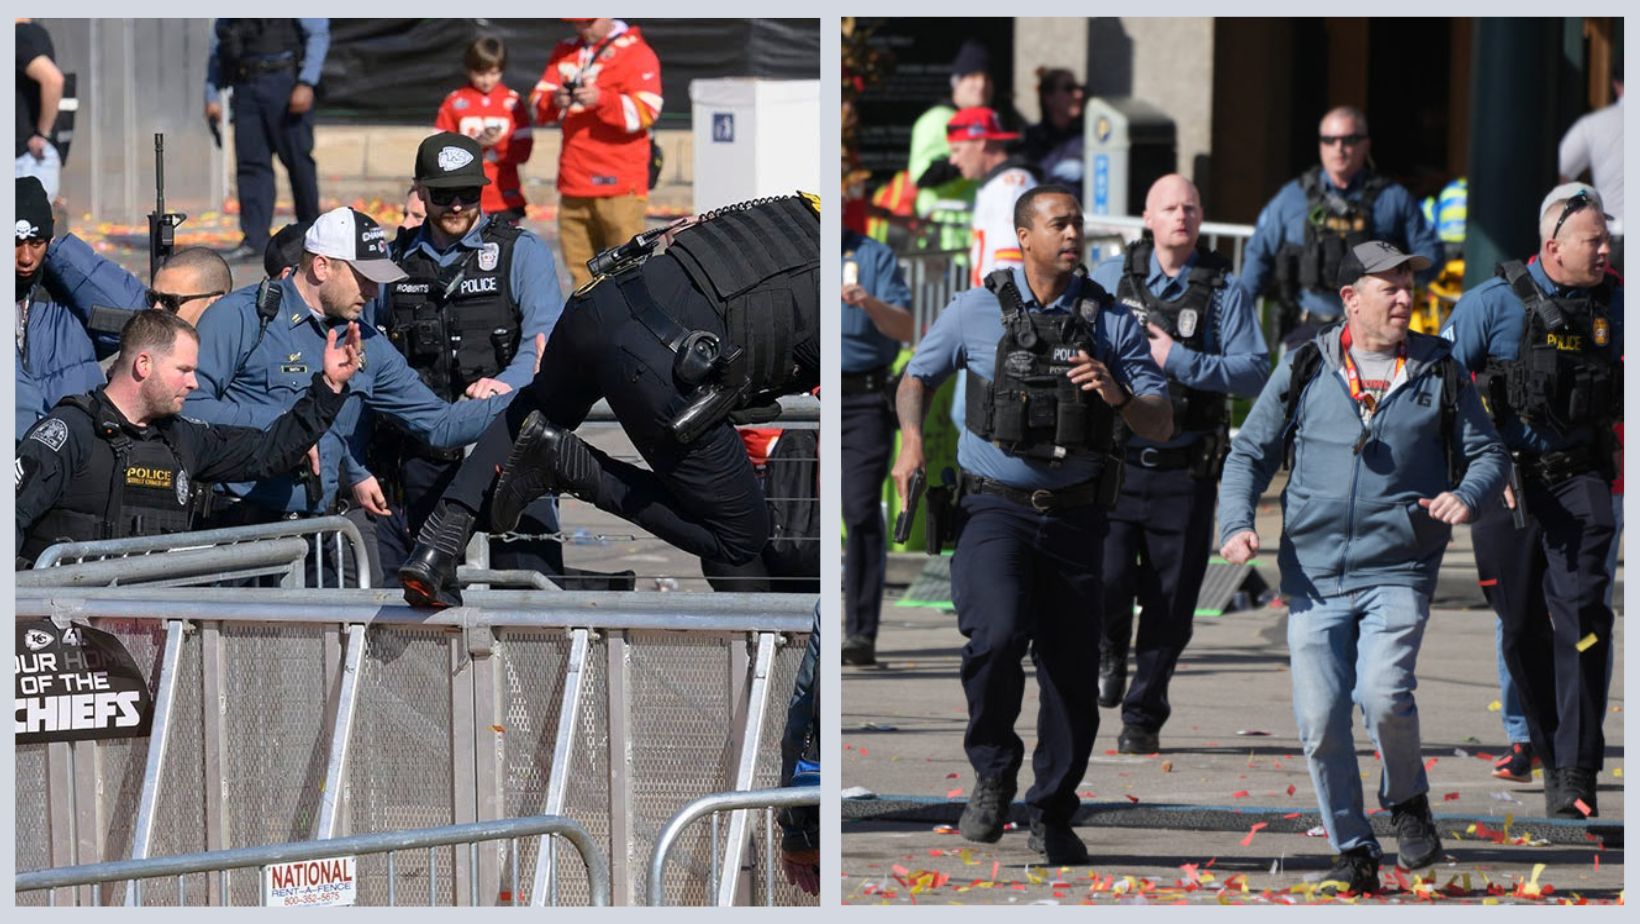 Dominic Miller Health Condition: Is The Kansas City Parade Shooter Sick?